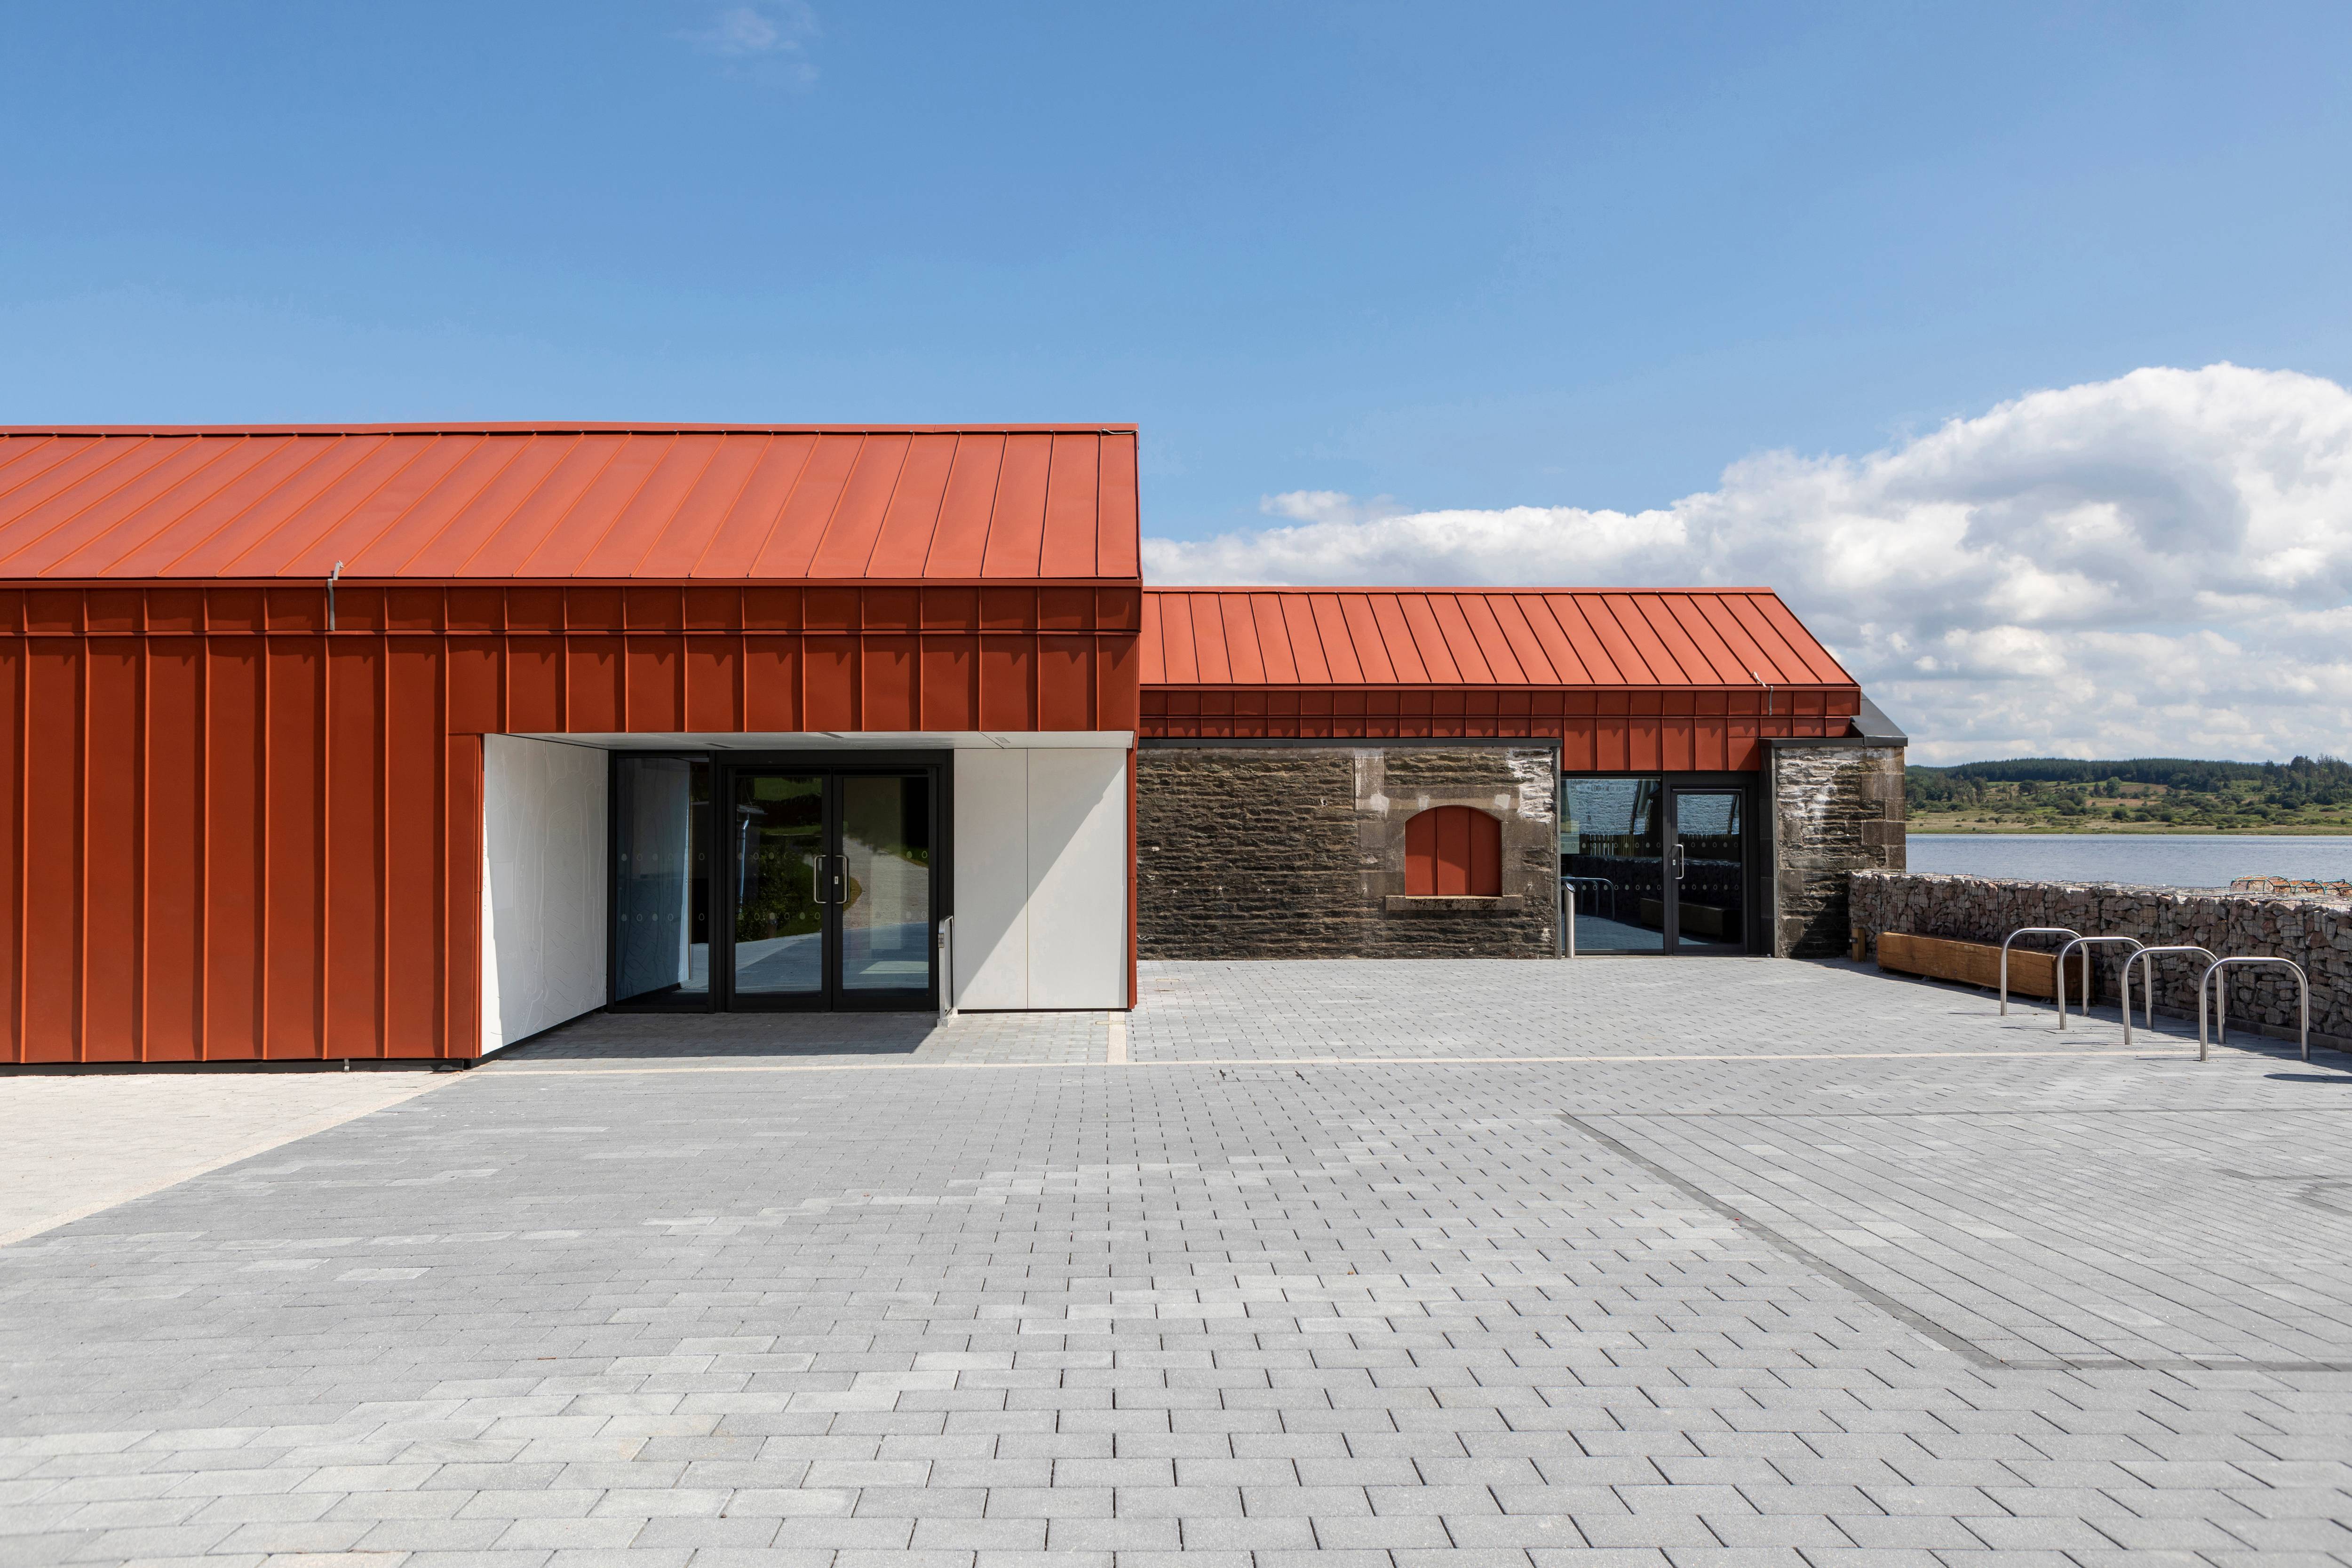 The Egg Shed (Ardrishaig, Lochgilphead) by Oliver Chapman Architects. Photo: Angus Bremner